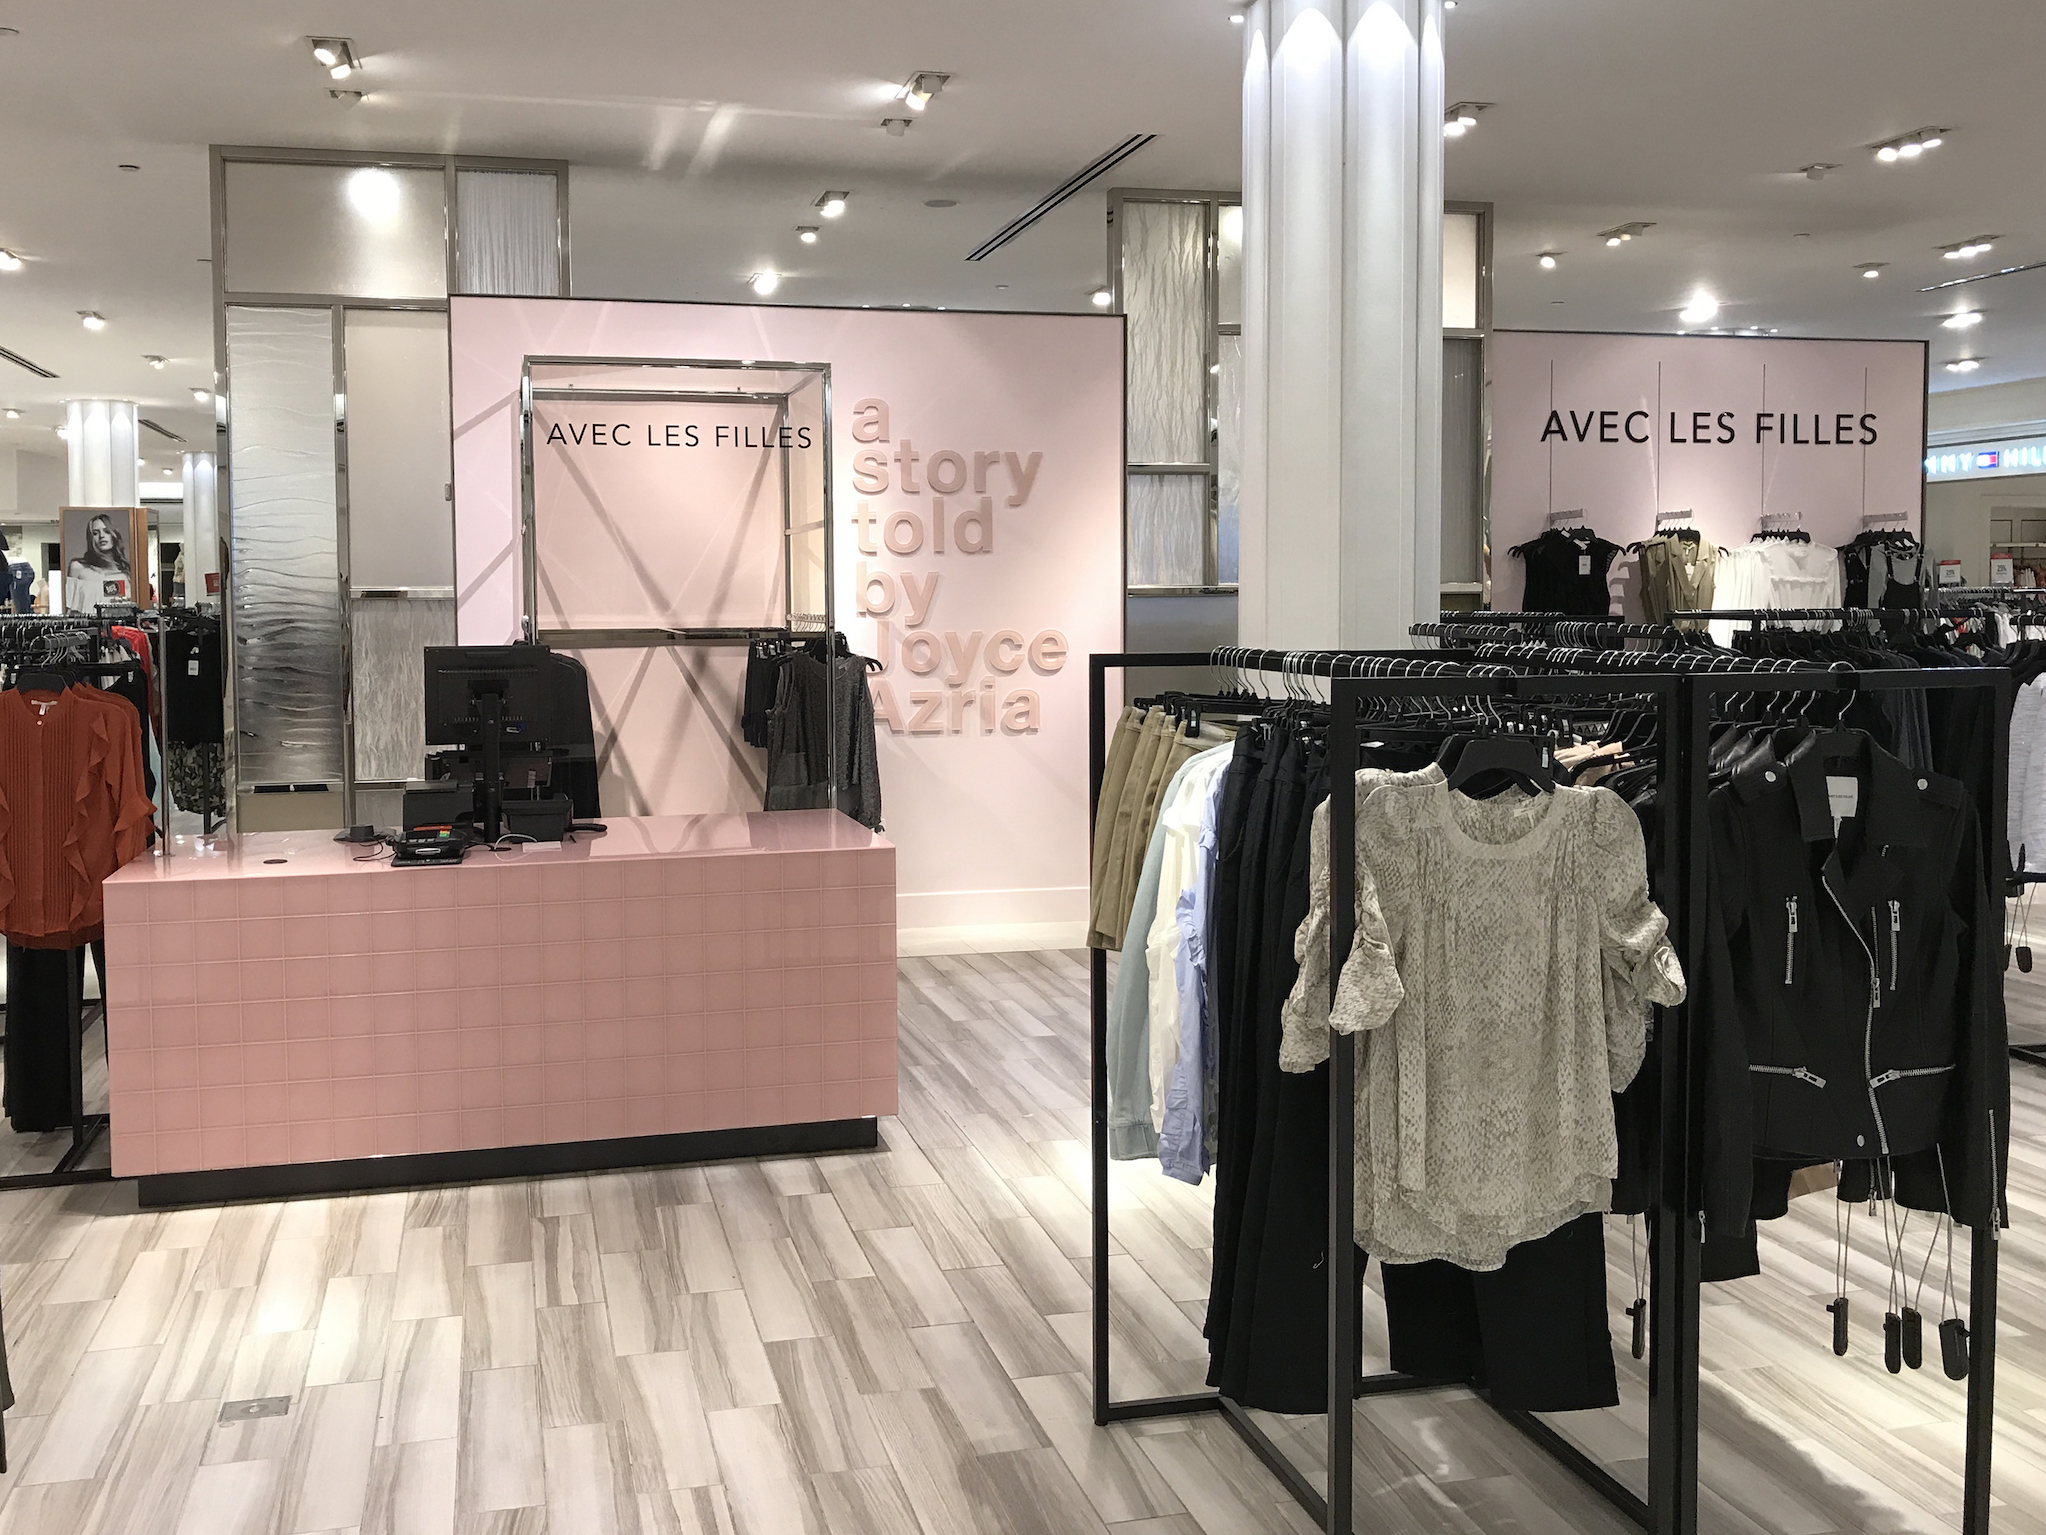 The Macy's Herald Square Avec Les Filles shop features pink walls, tile and smoky glass.